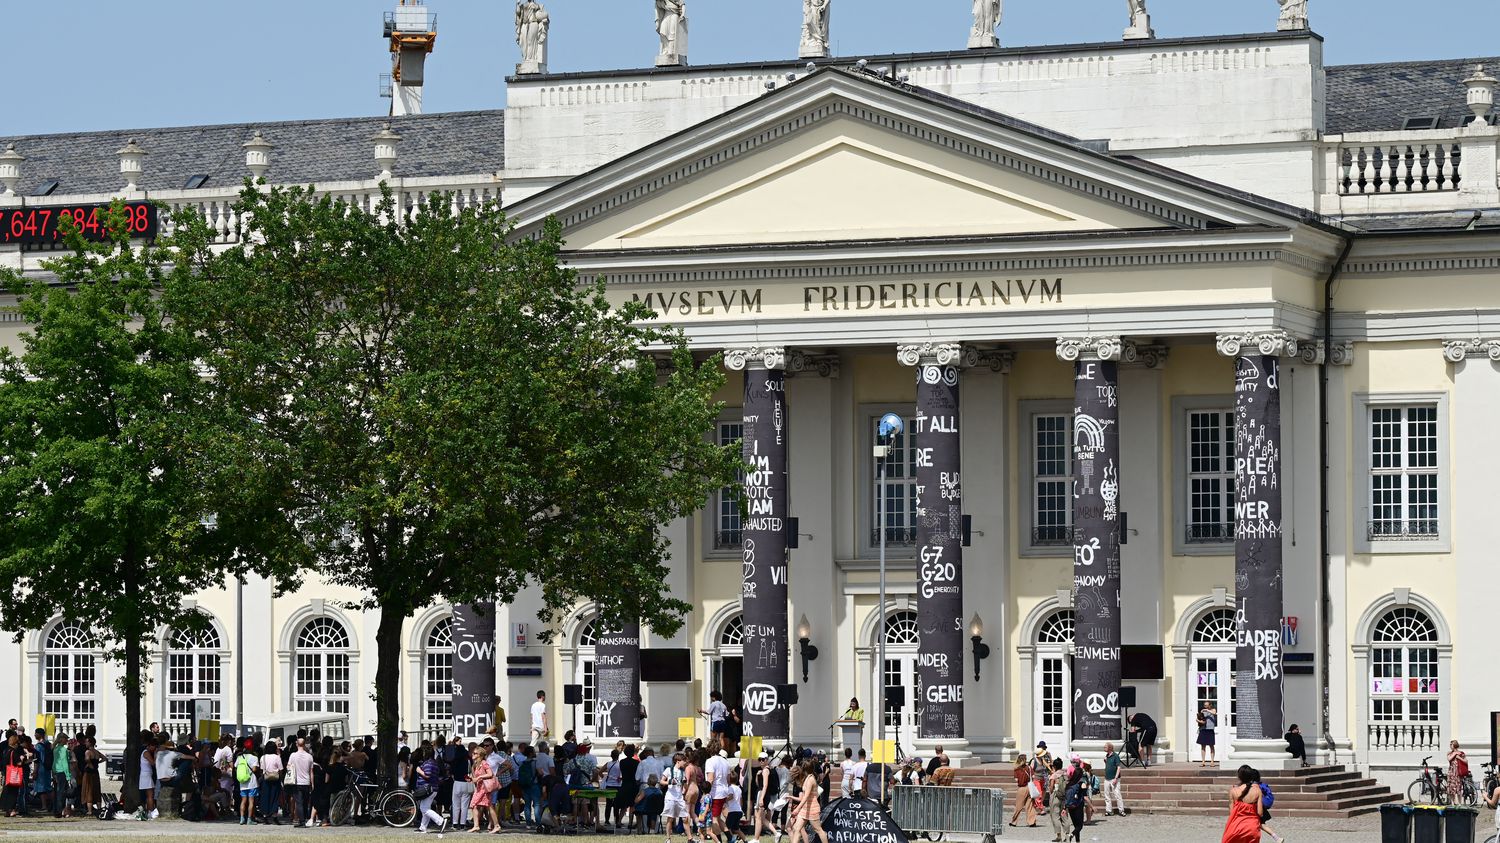 A work described as anti-Semitic covered at the Documenta in Kassel
